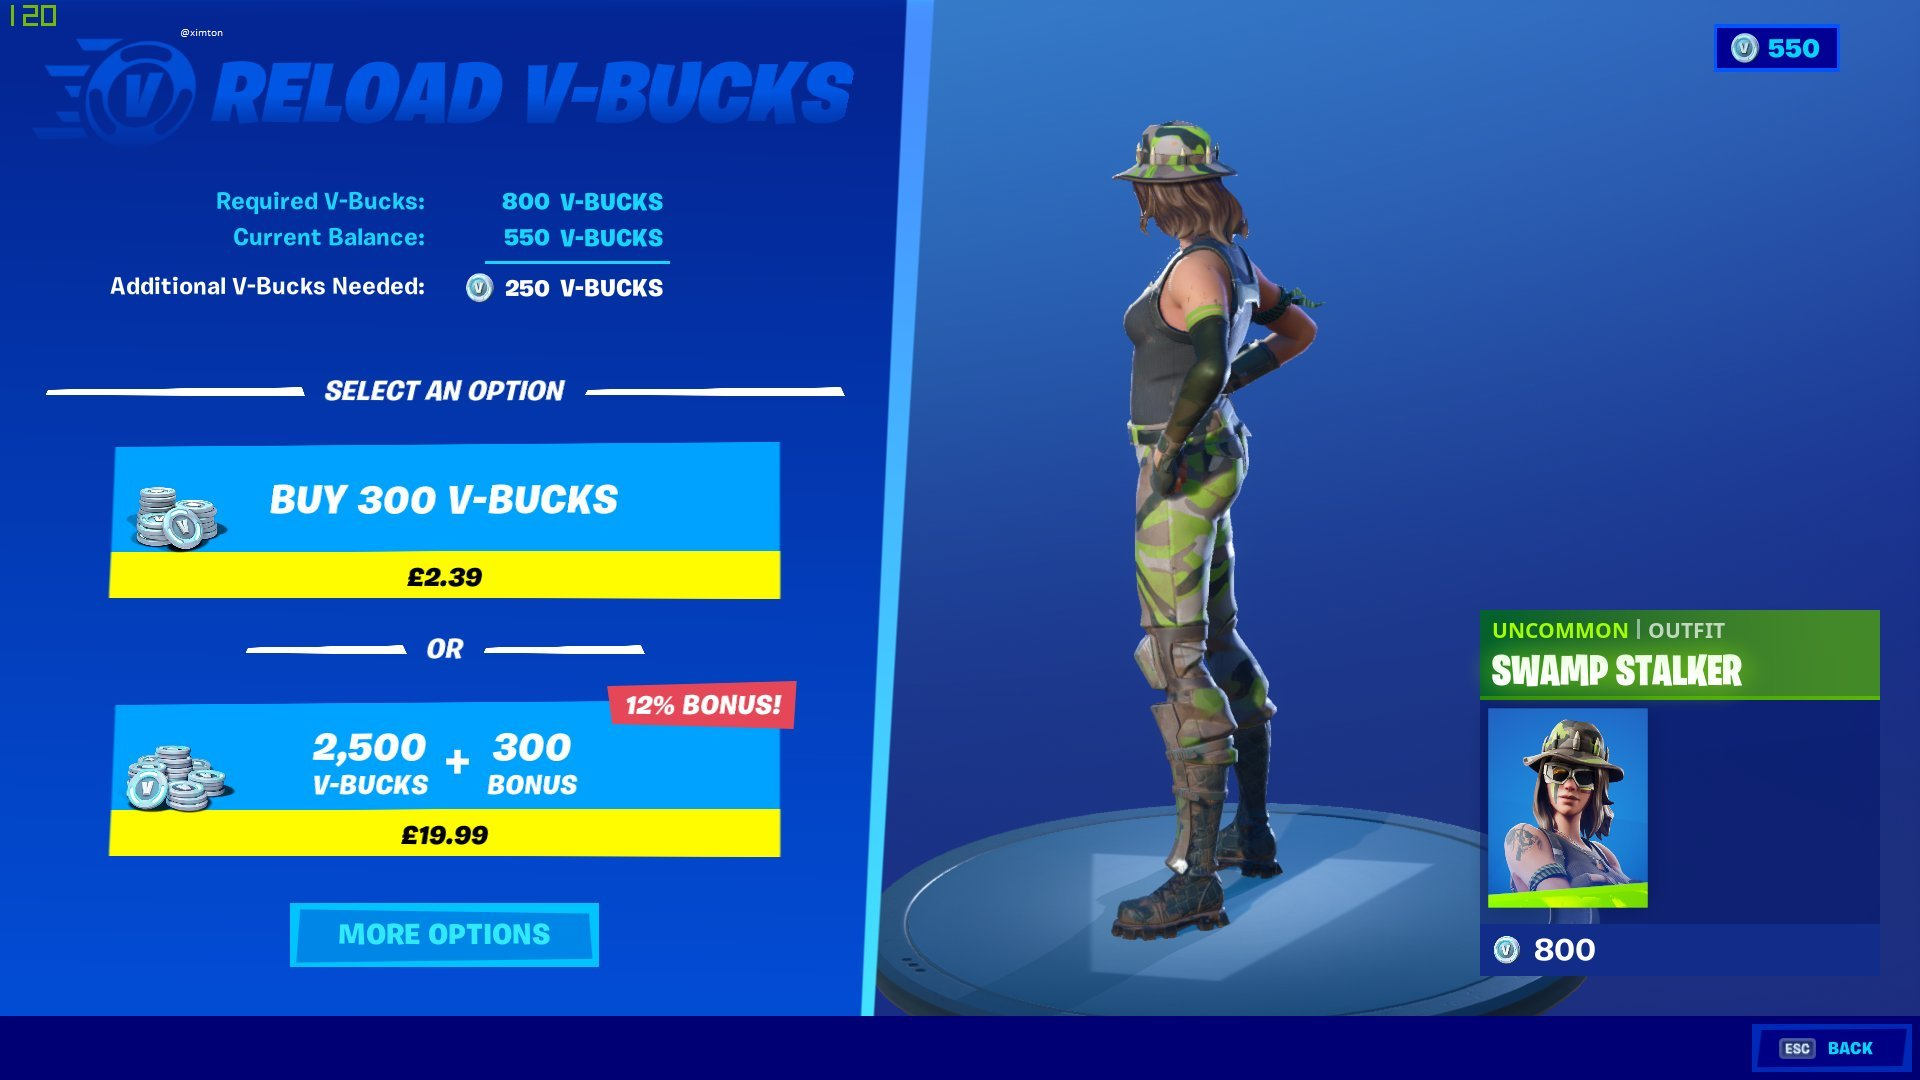 Reload V-Bucks feature enabled in Germany